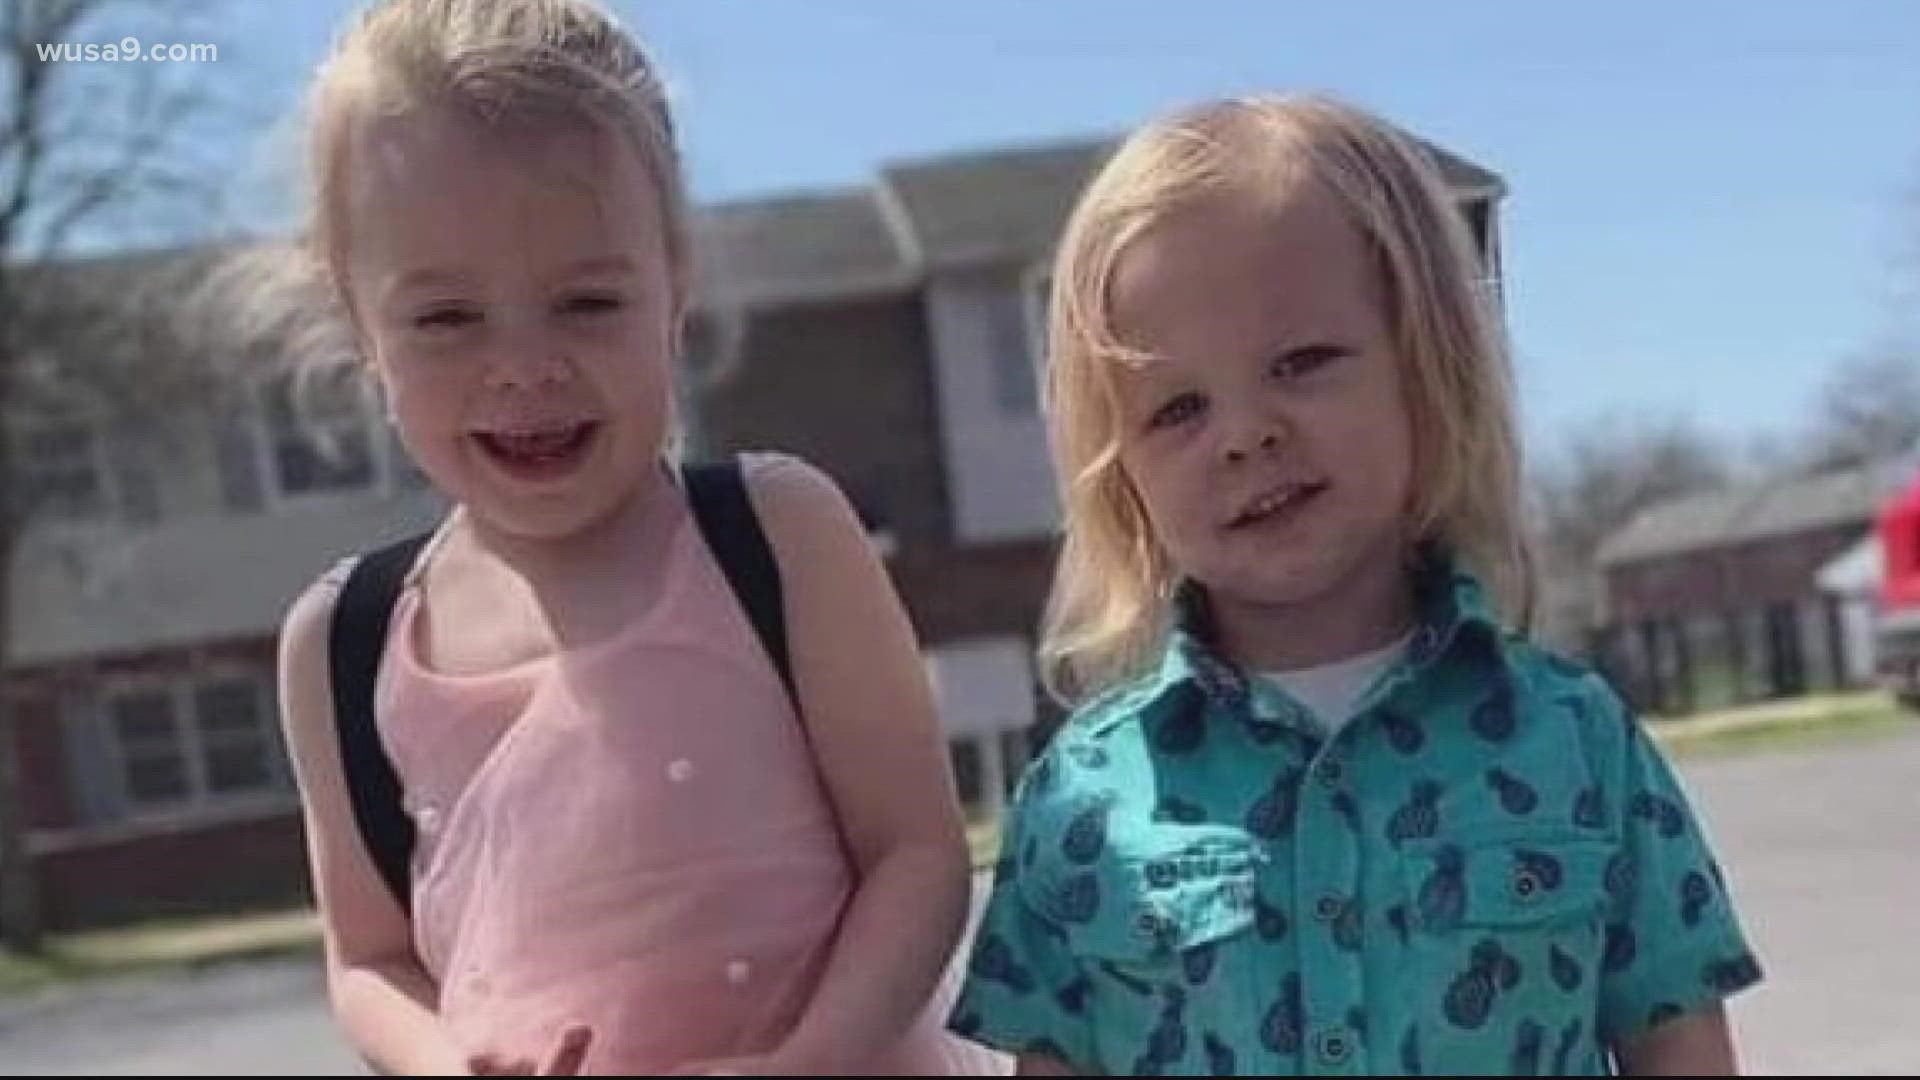 The pair were transported to Children's National but succumbed to their injuries Sunday. A GoFundMe to cover medical expenses has been set up for the family.